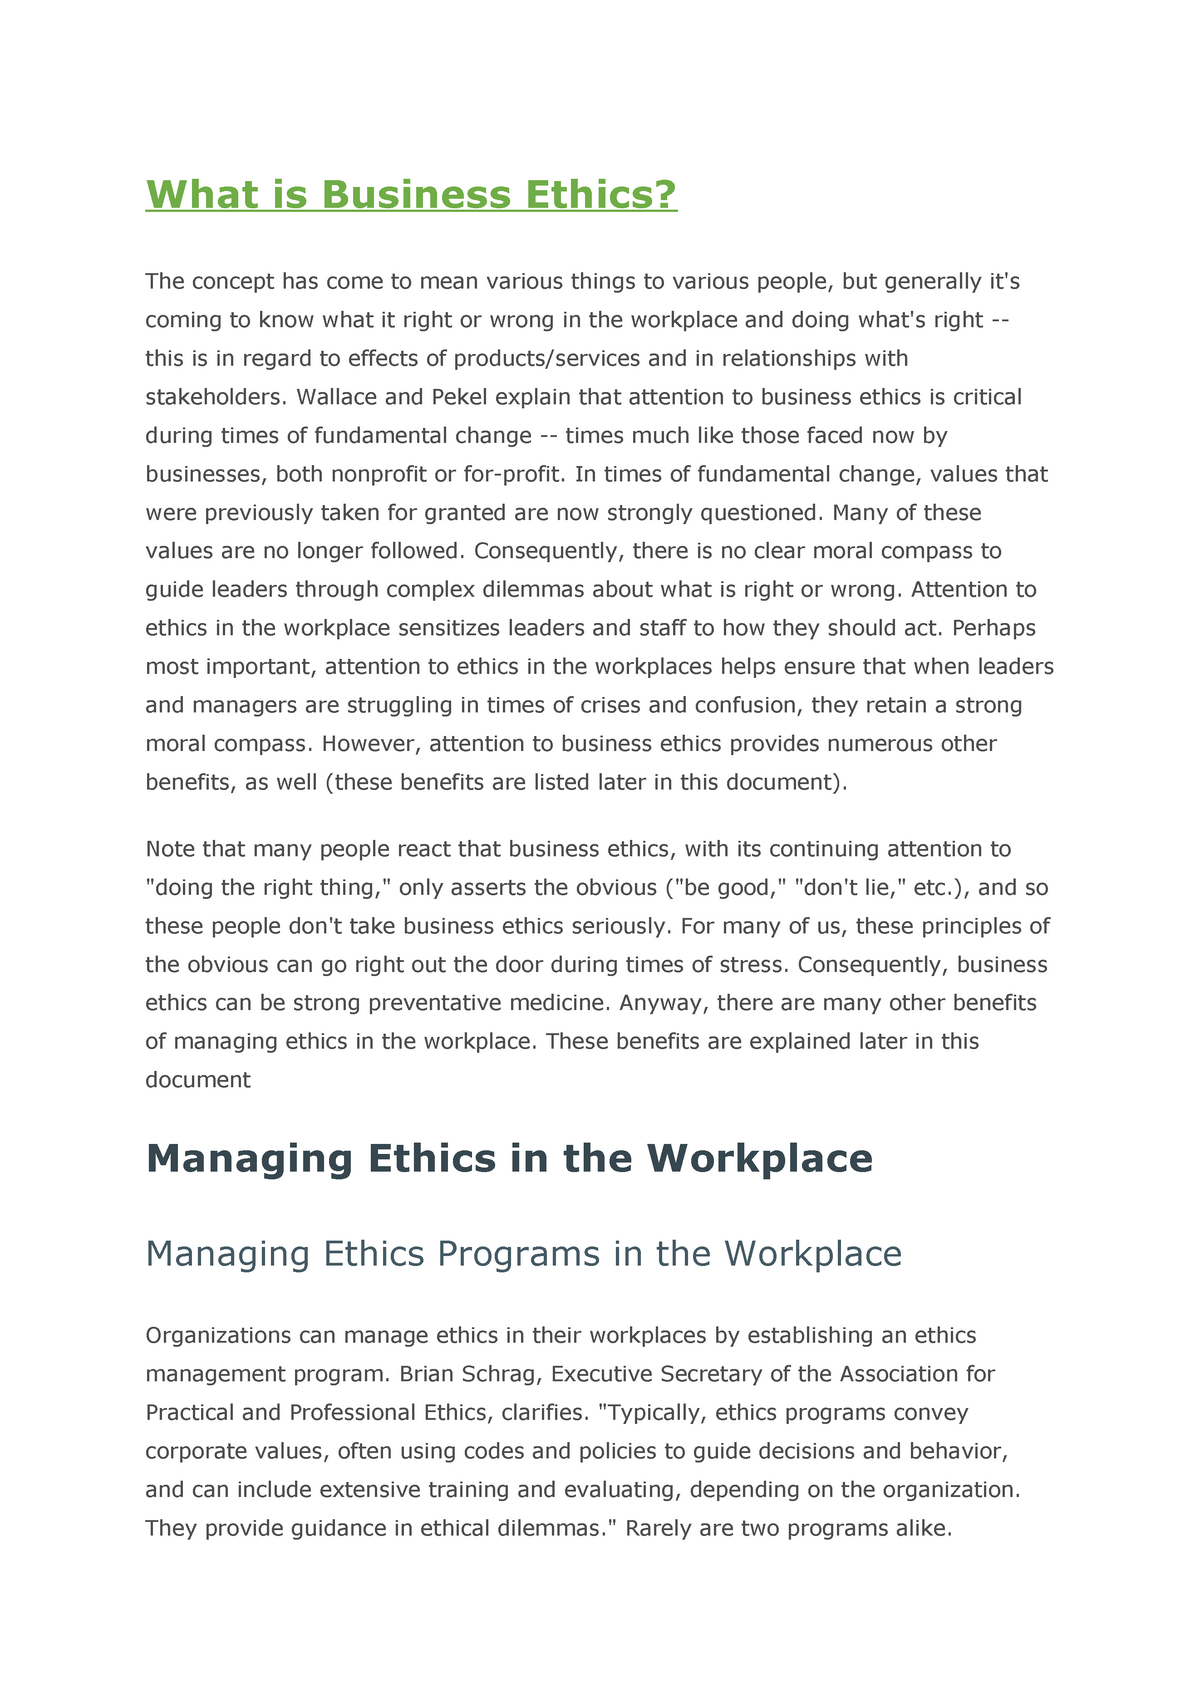 thesis about business ethics